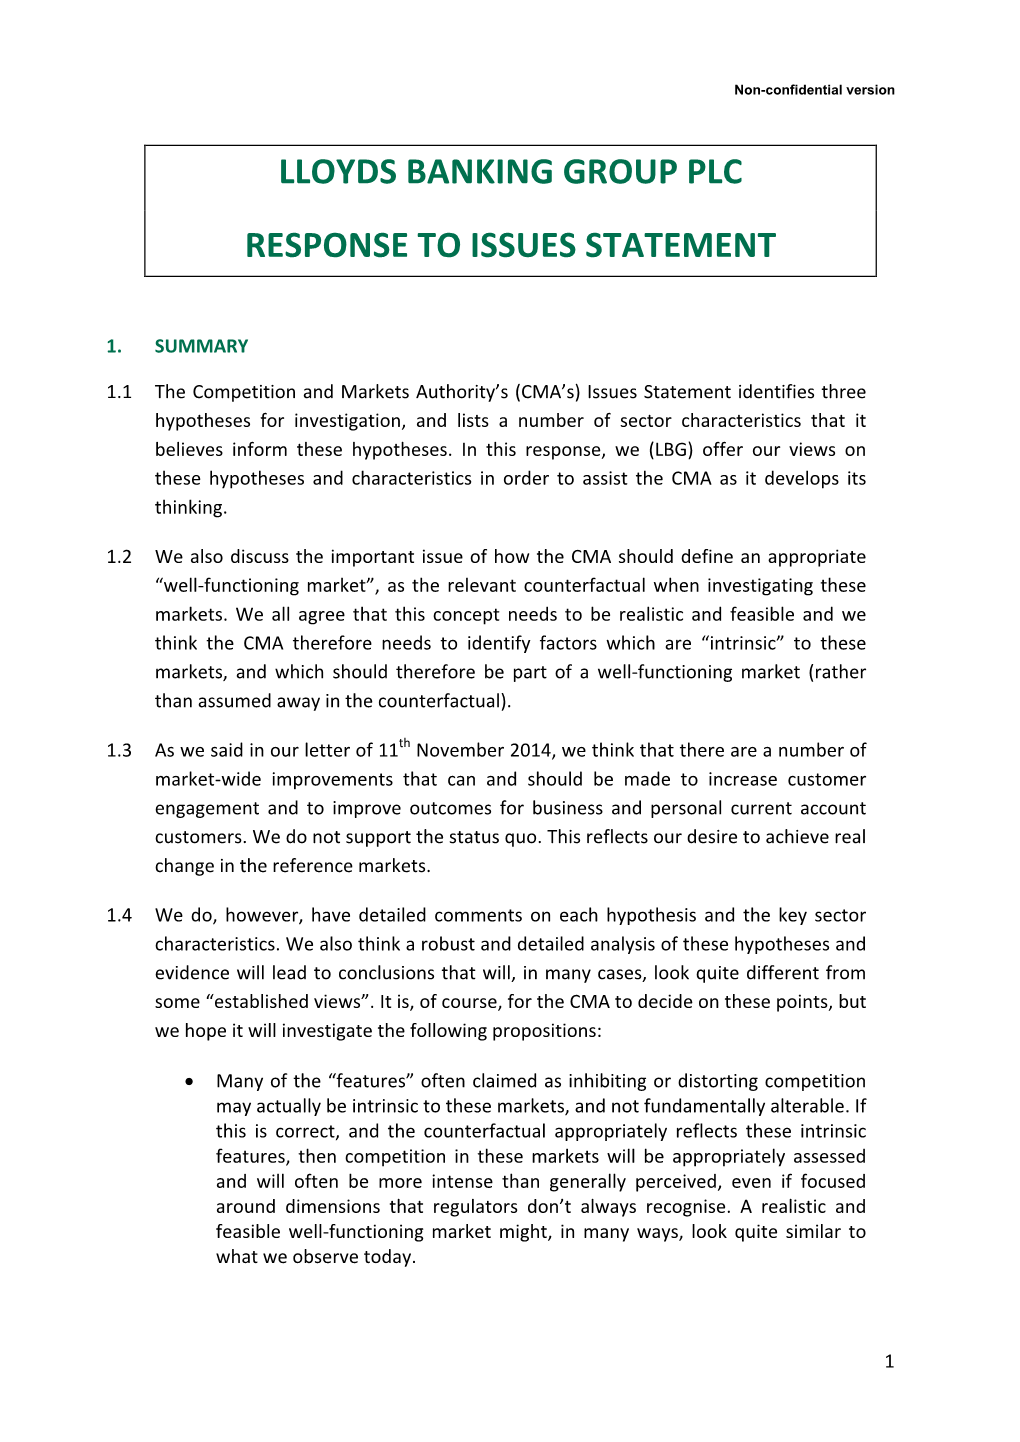 Lloyds Banking Group Plc Response to Issues Statement